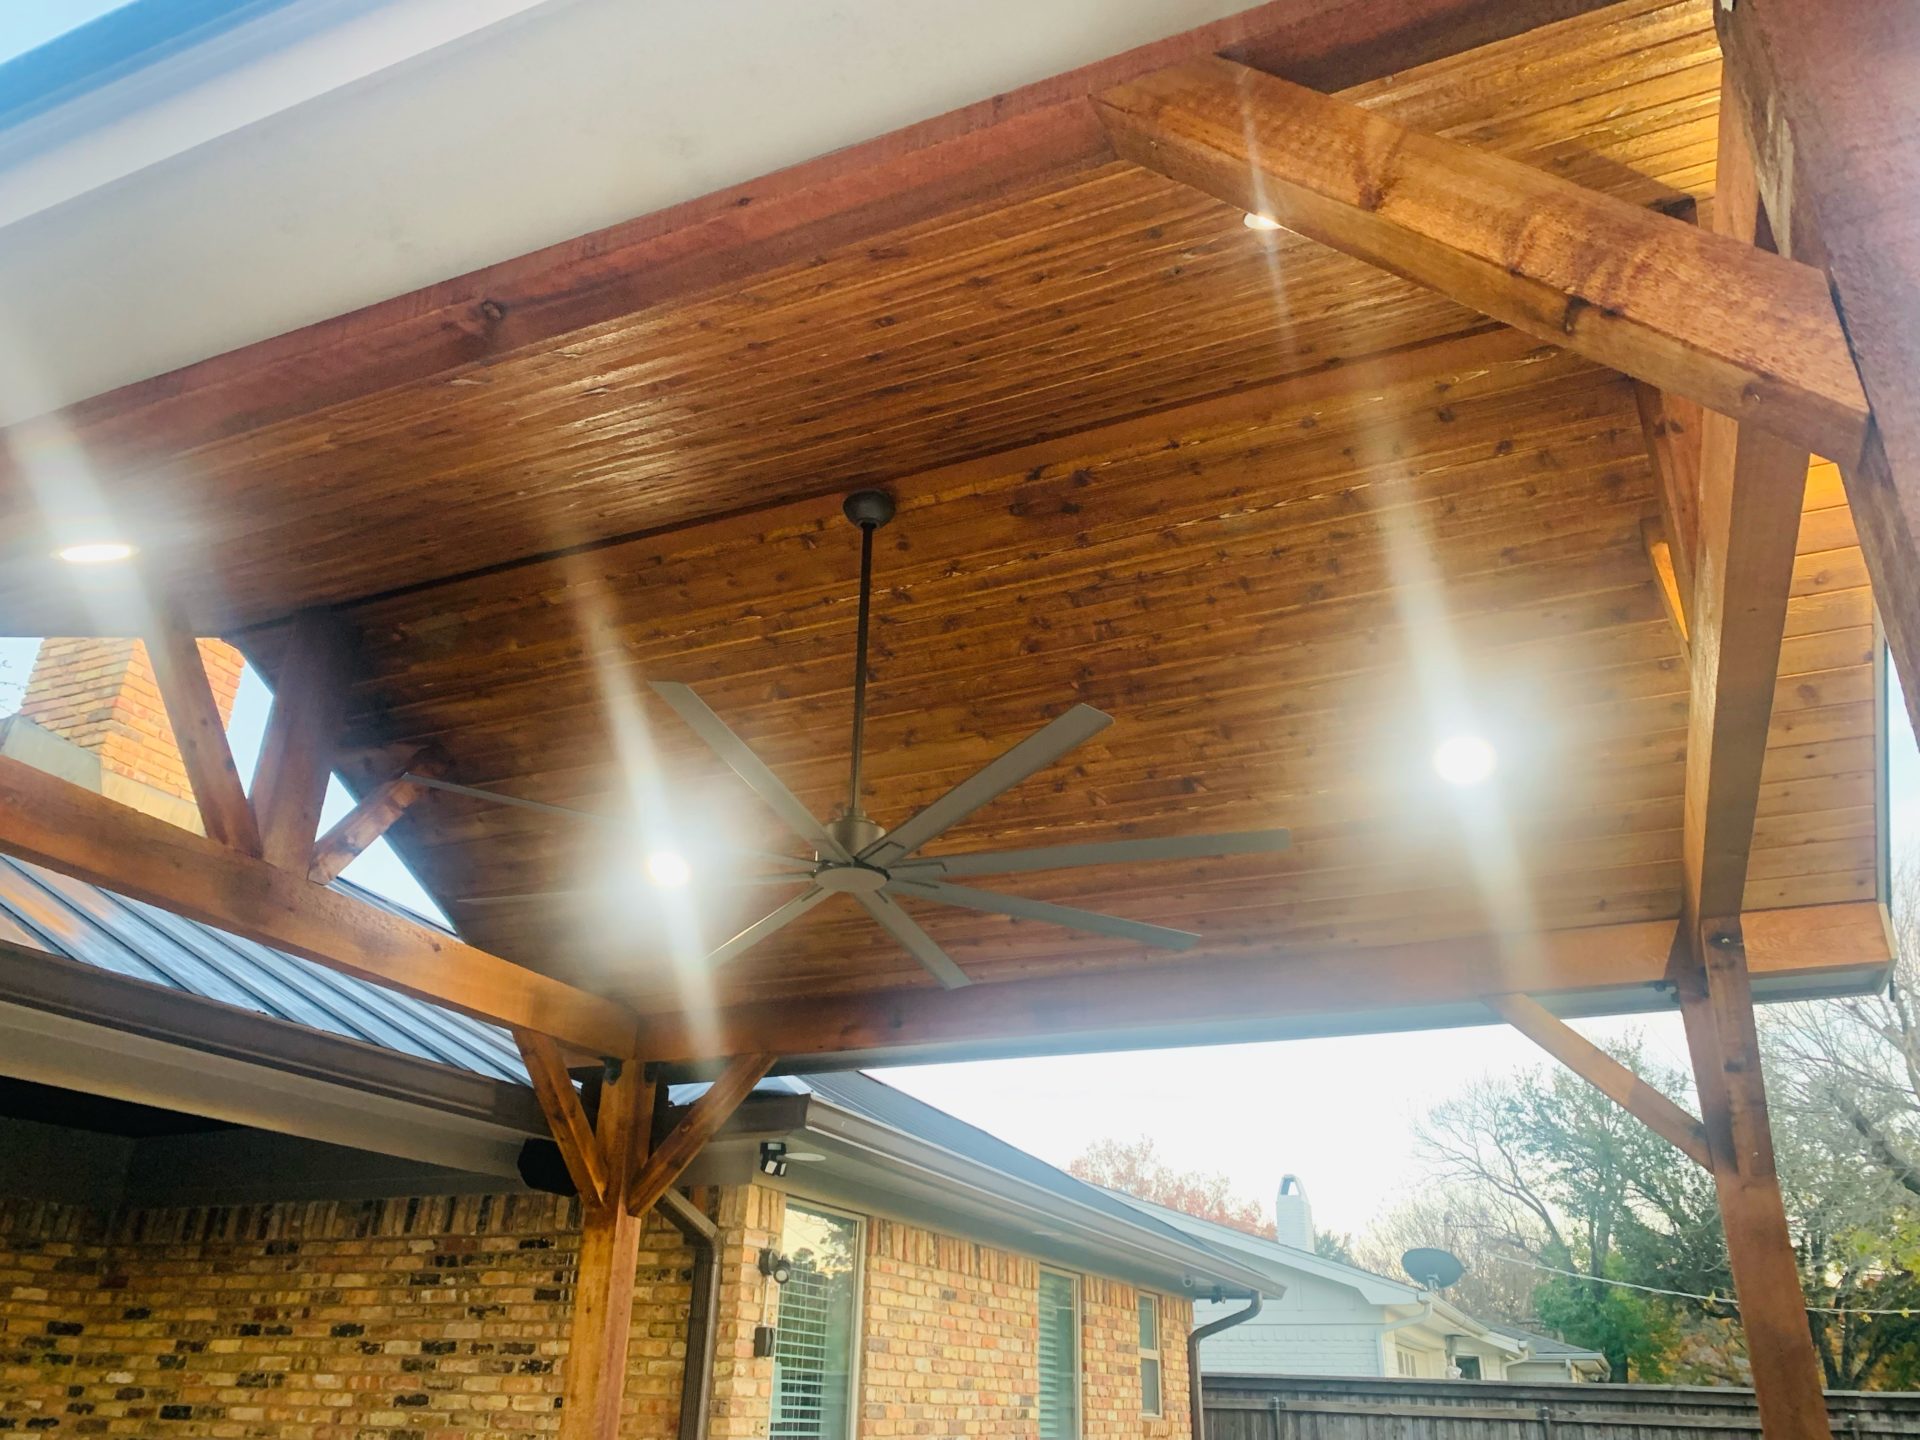 Professional outdoor pavilion patio cover build in Arlington, TX by Jenkins roofing with ceiling fan and custom ceiling lighting